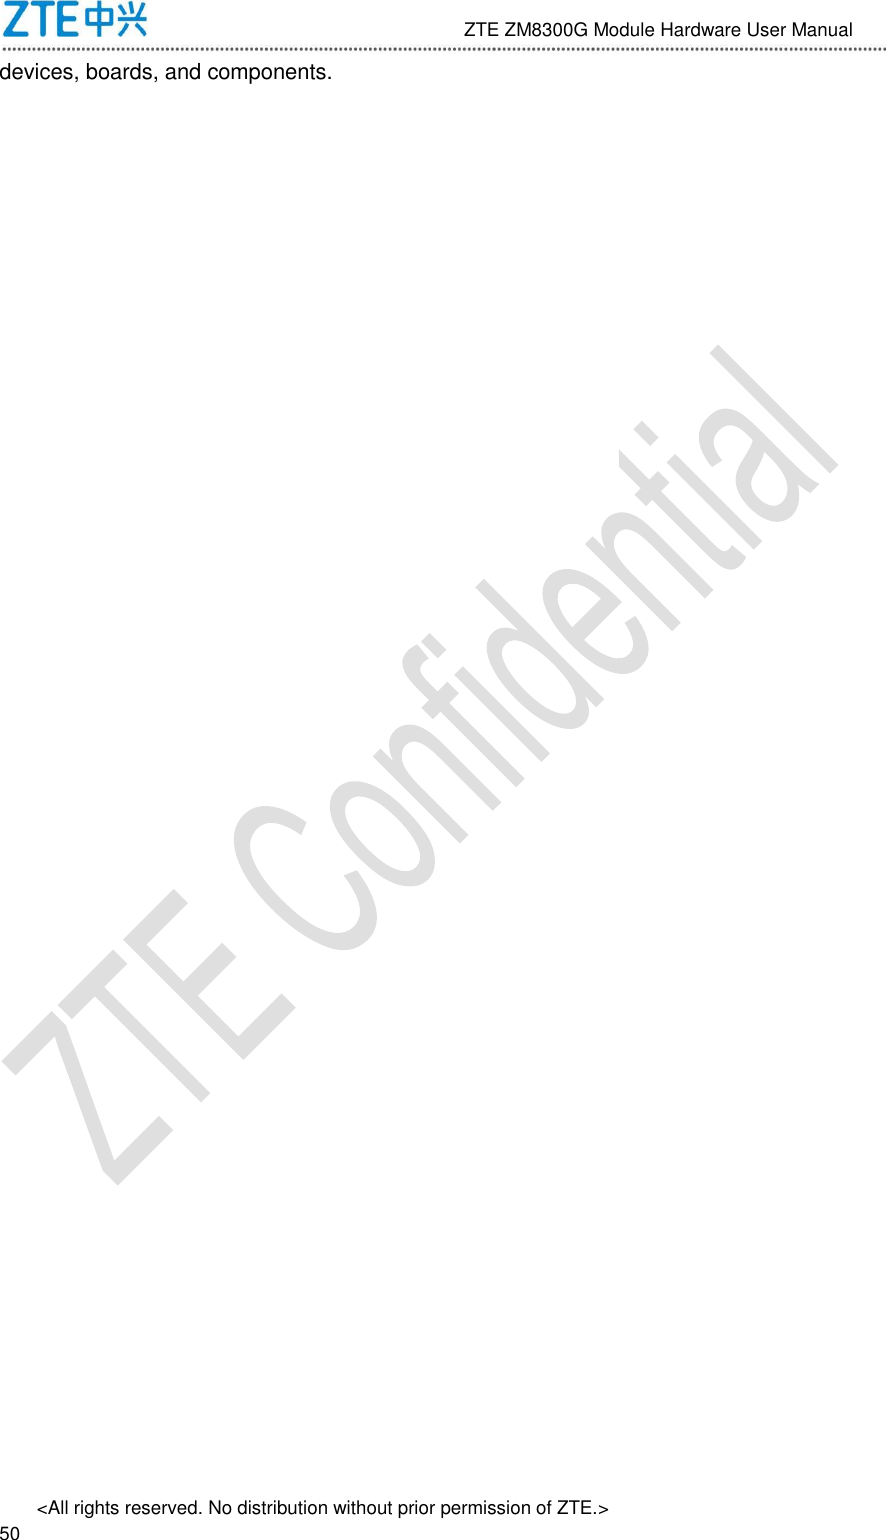                              ZTE ZM8300G Module Hardware User Manual &lt;All rights reserved. No distribution without prior permission of ZTE.&gt;                                                               50 devices, boards, and components. 